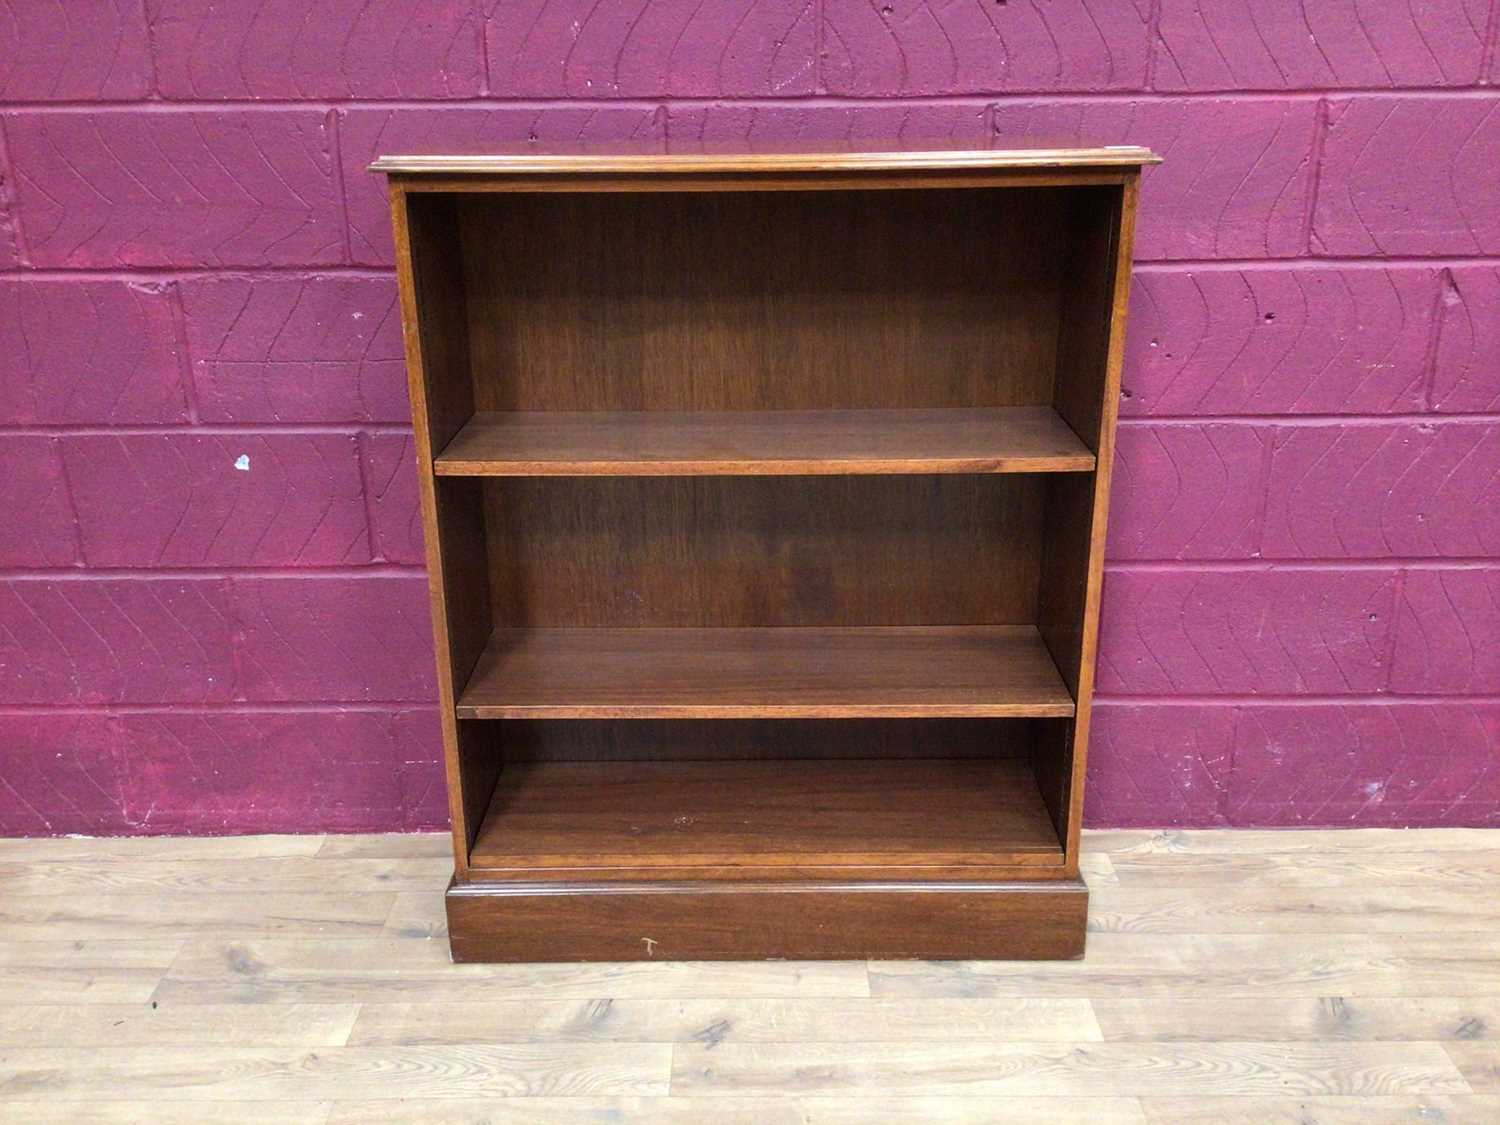 Mahogany open bookcase with adjustable shelves, 92cm wide, 31cm deep, 112cm high